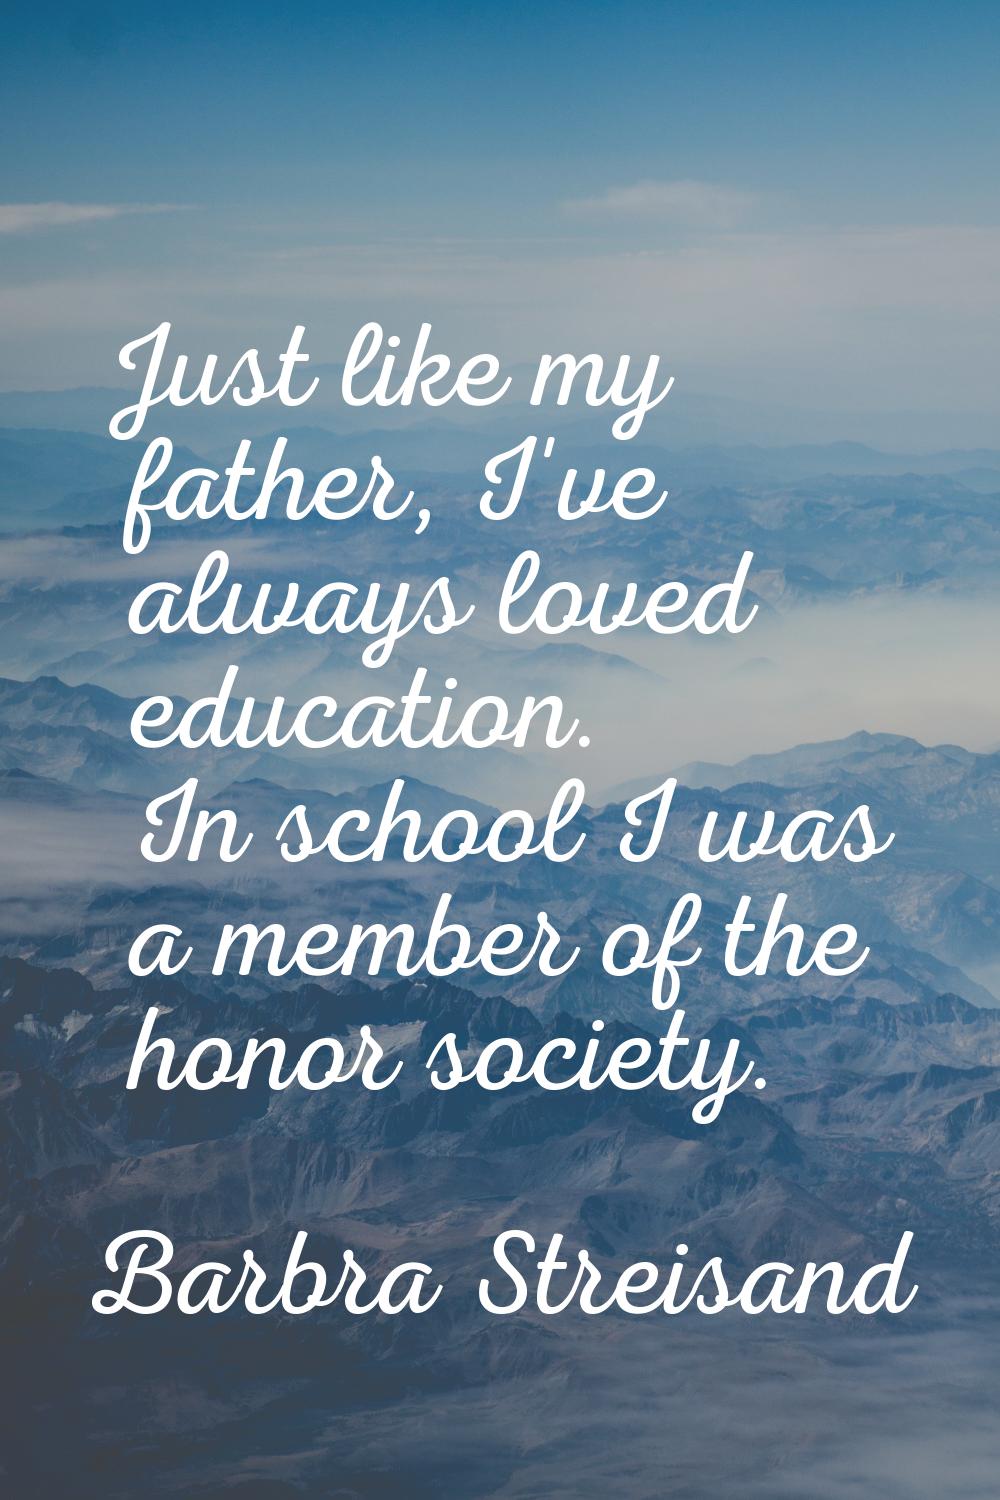 Just like my father, I've always loved education. In school I was a member of the honor society.